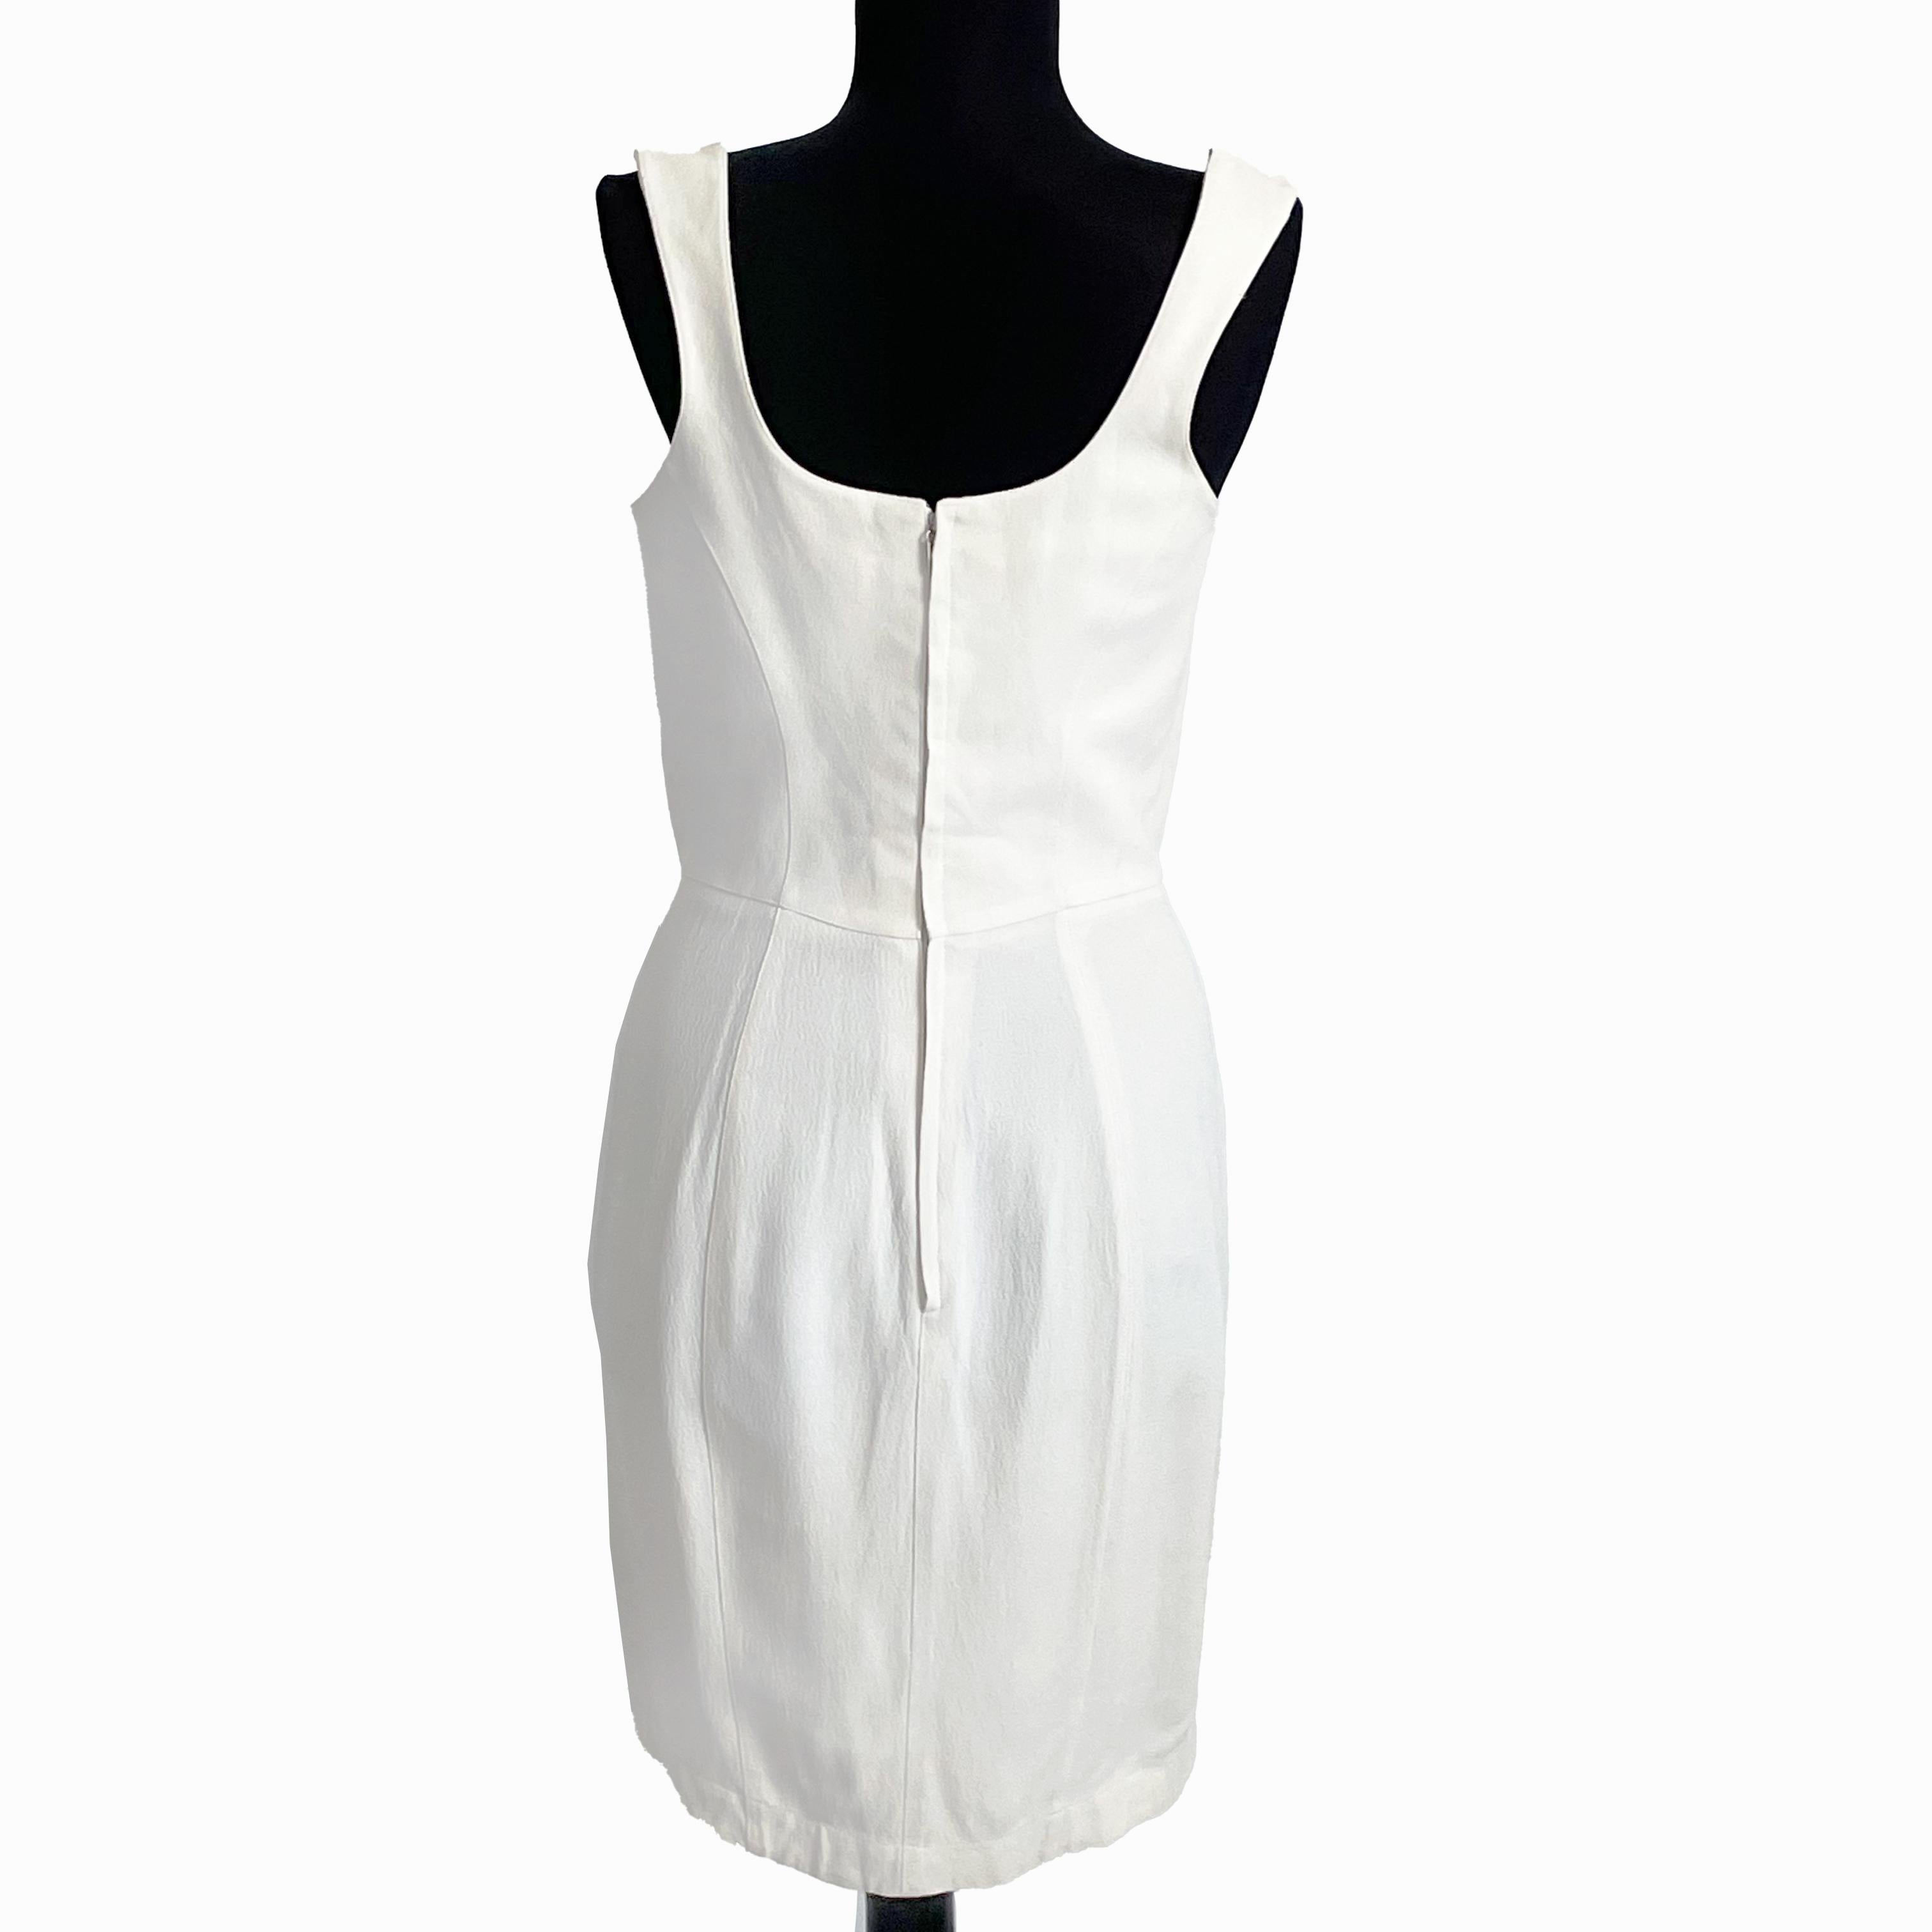 Thierry Mugler Cocktail Dress White Crepe Sculptural Chic Vintage 90s Sz 40 HTF For Sale 12